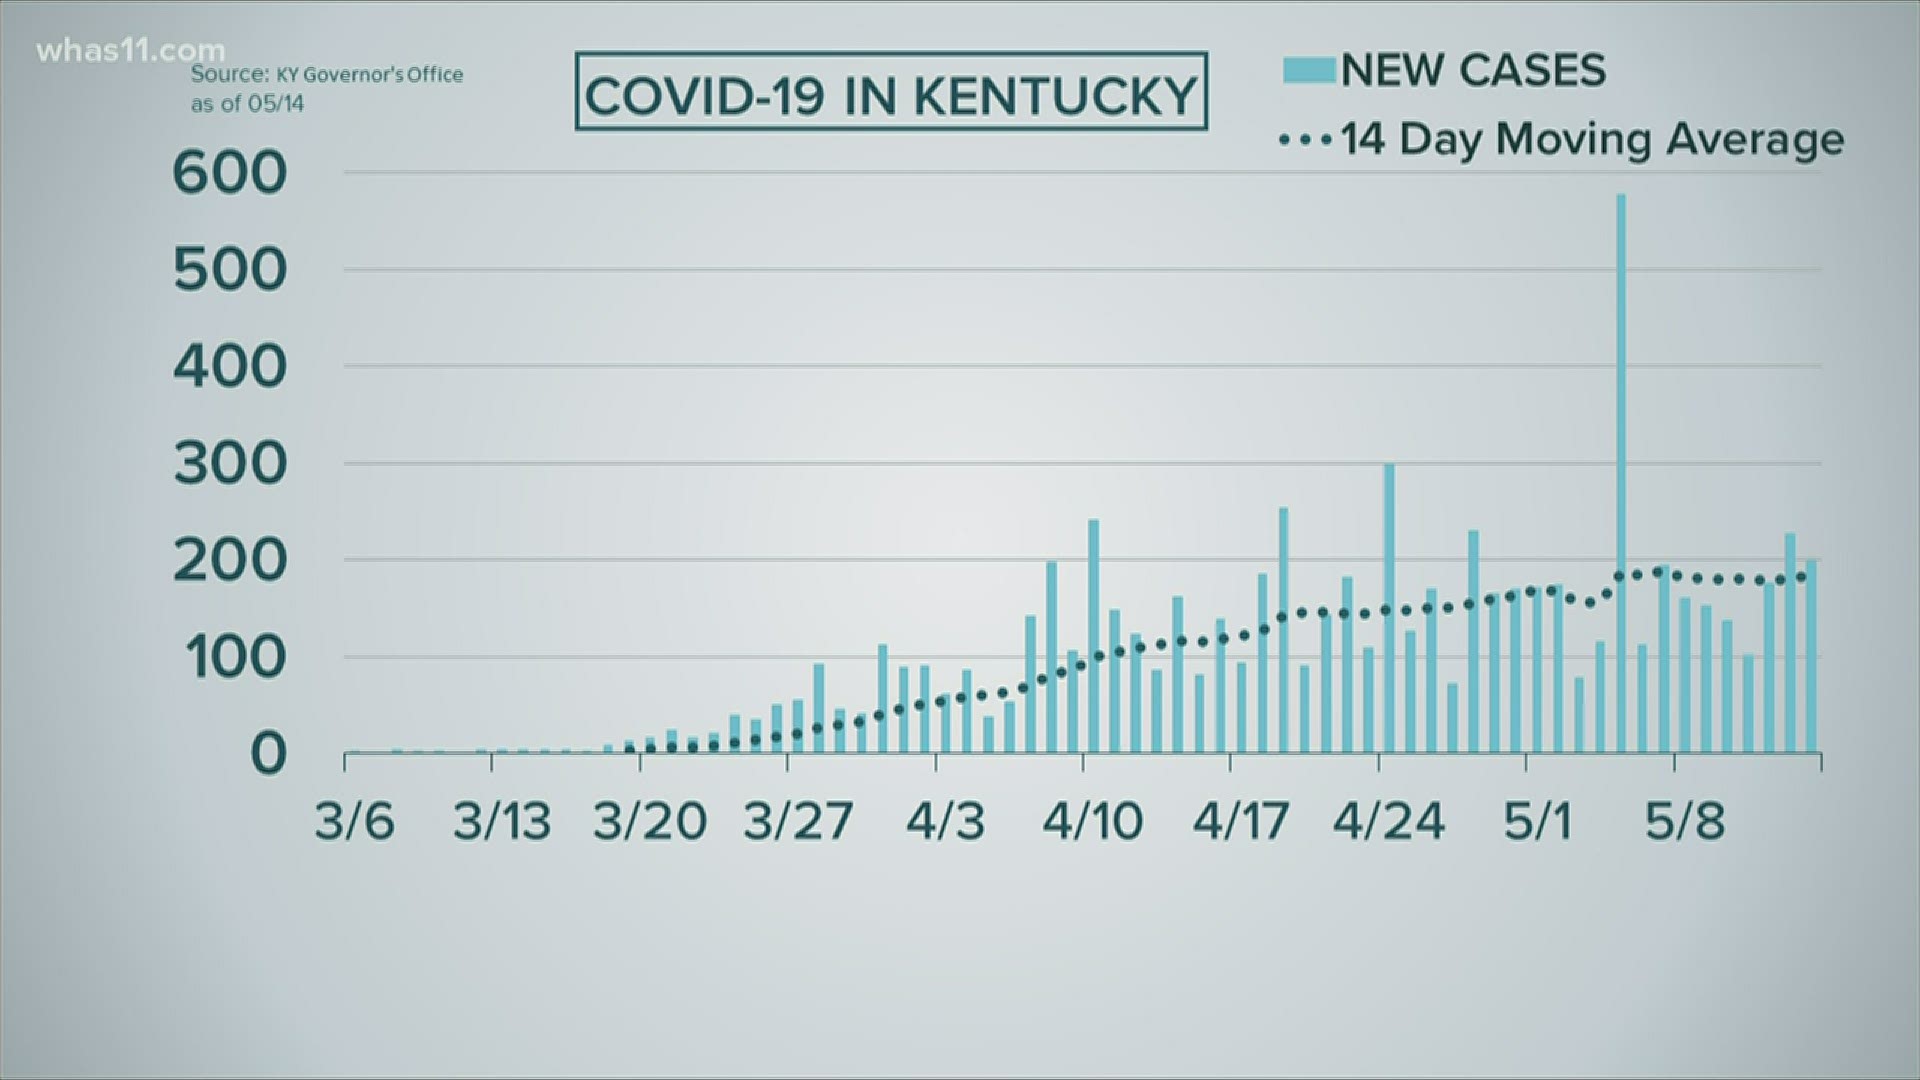 We can learn a lot by looking closer at the COVID-19 data-- finding trends that give context to what the infection looks like in our communities.